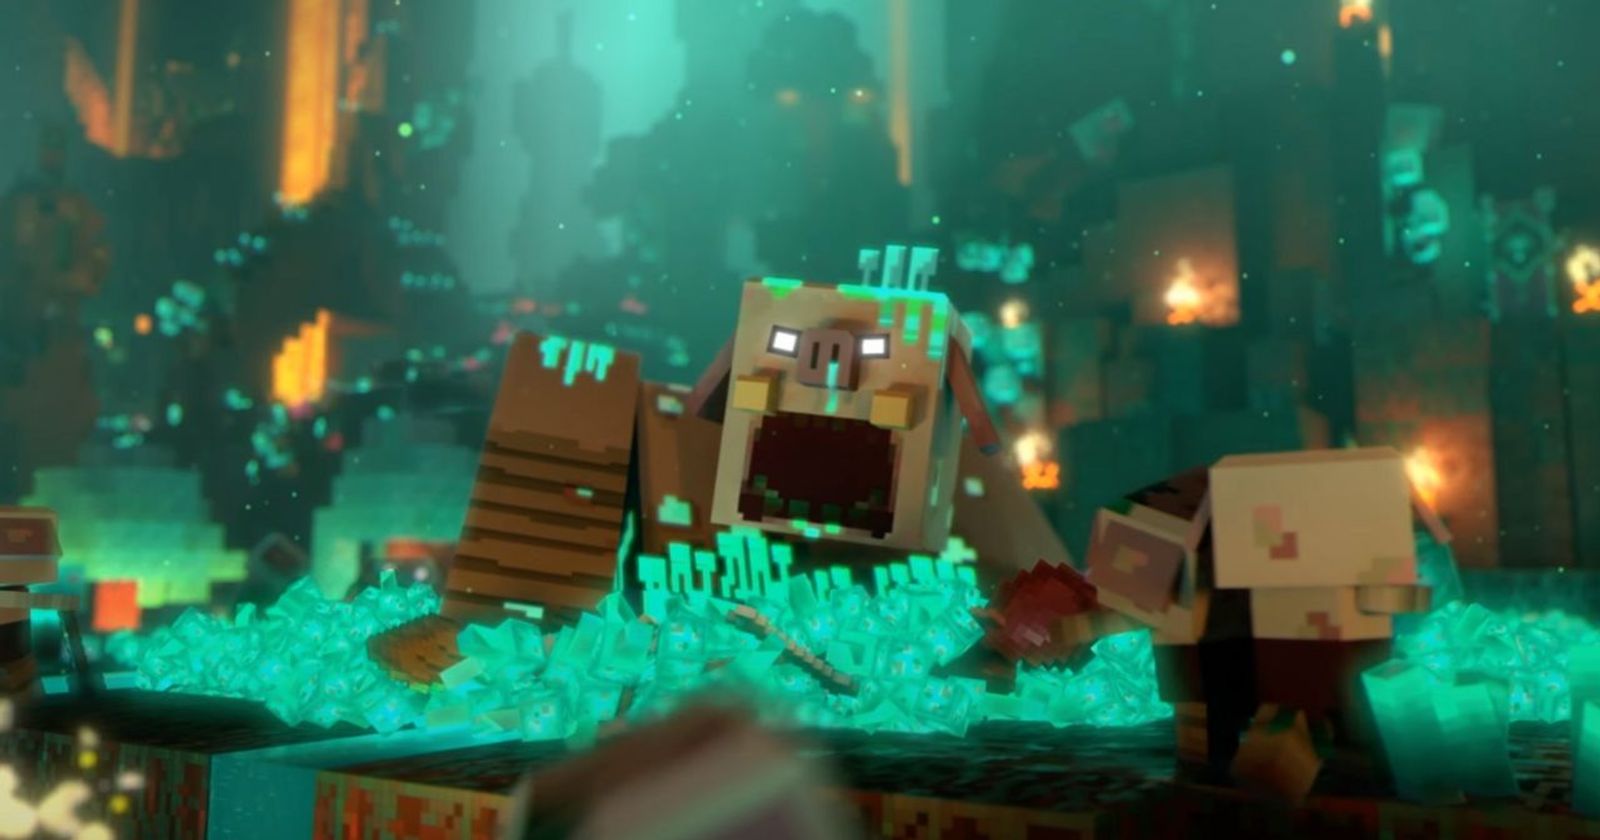 Minecraft Legends Preview - More Than Building Blocks - Game Informer